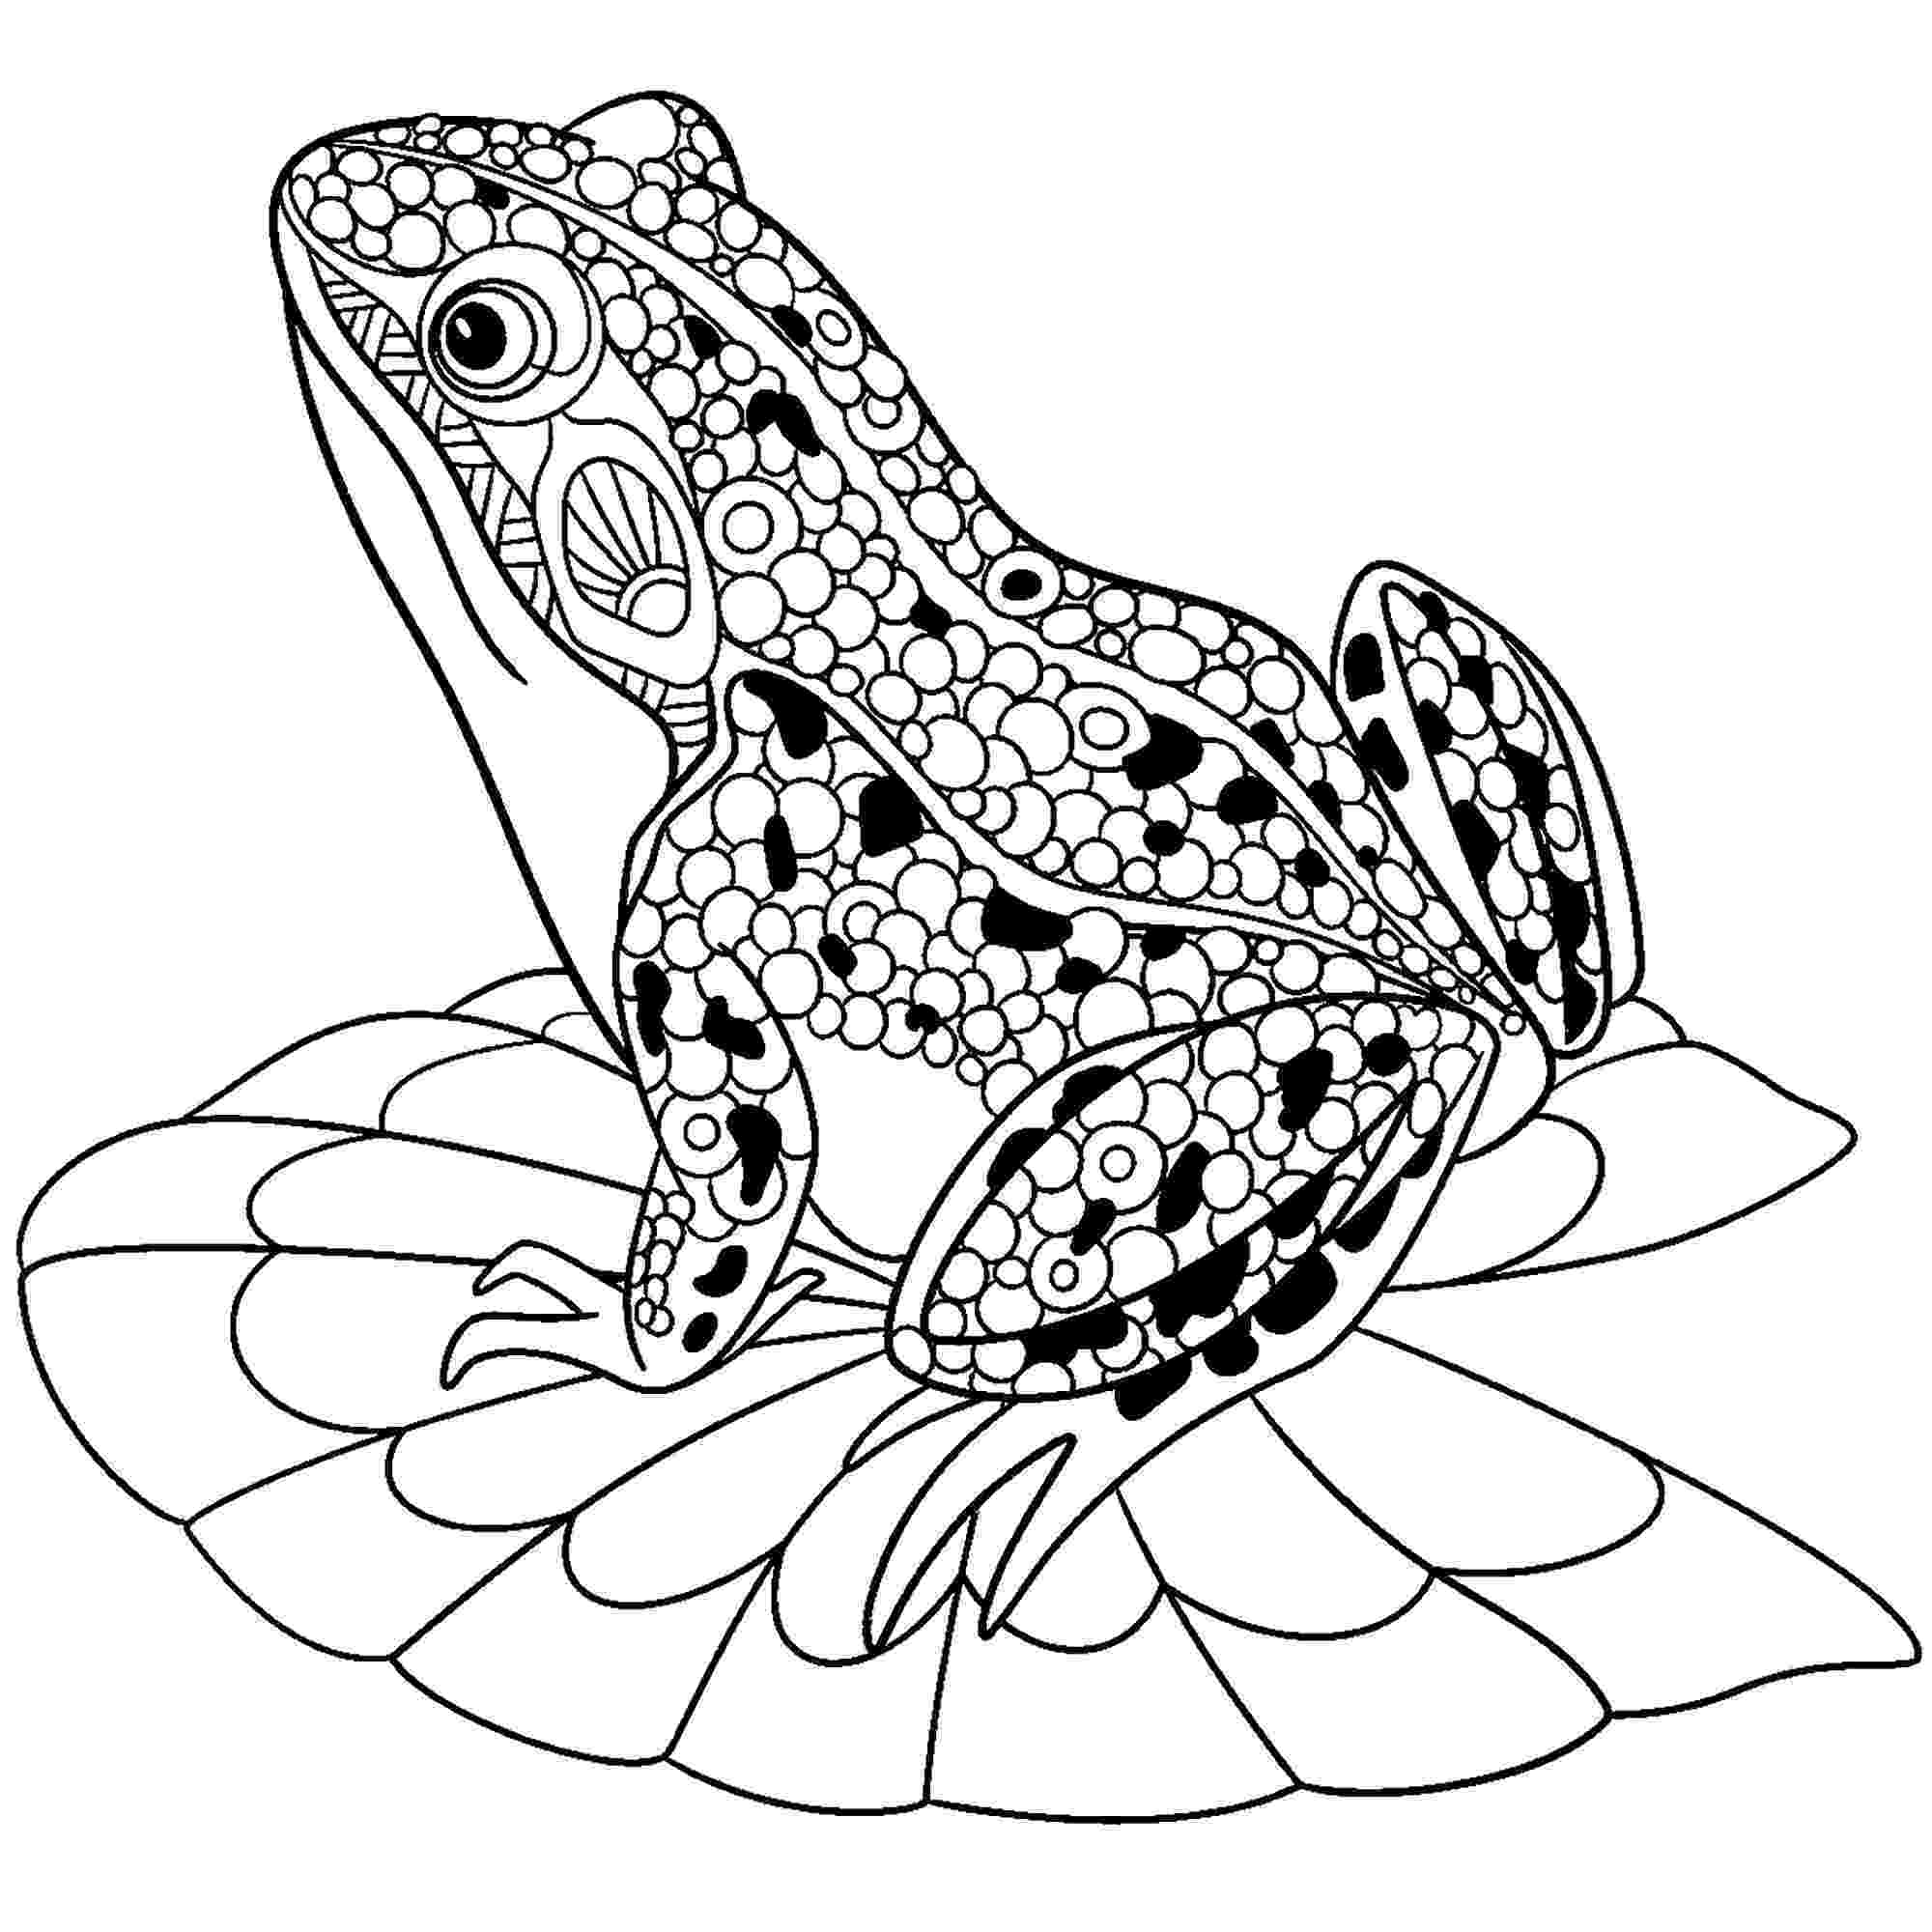 frogs coloring pages free frog coloring pages coloring pages frogs 